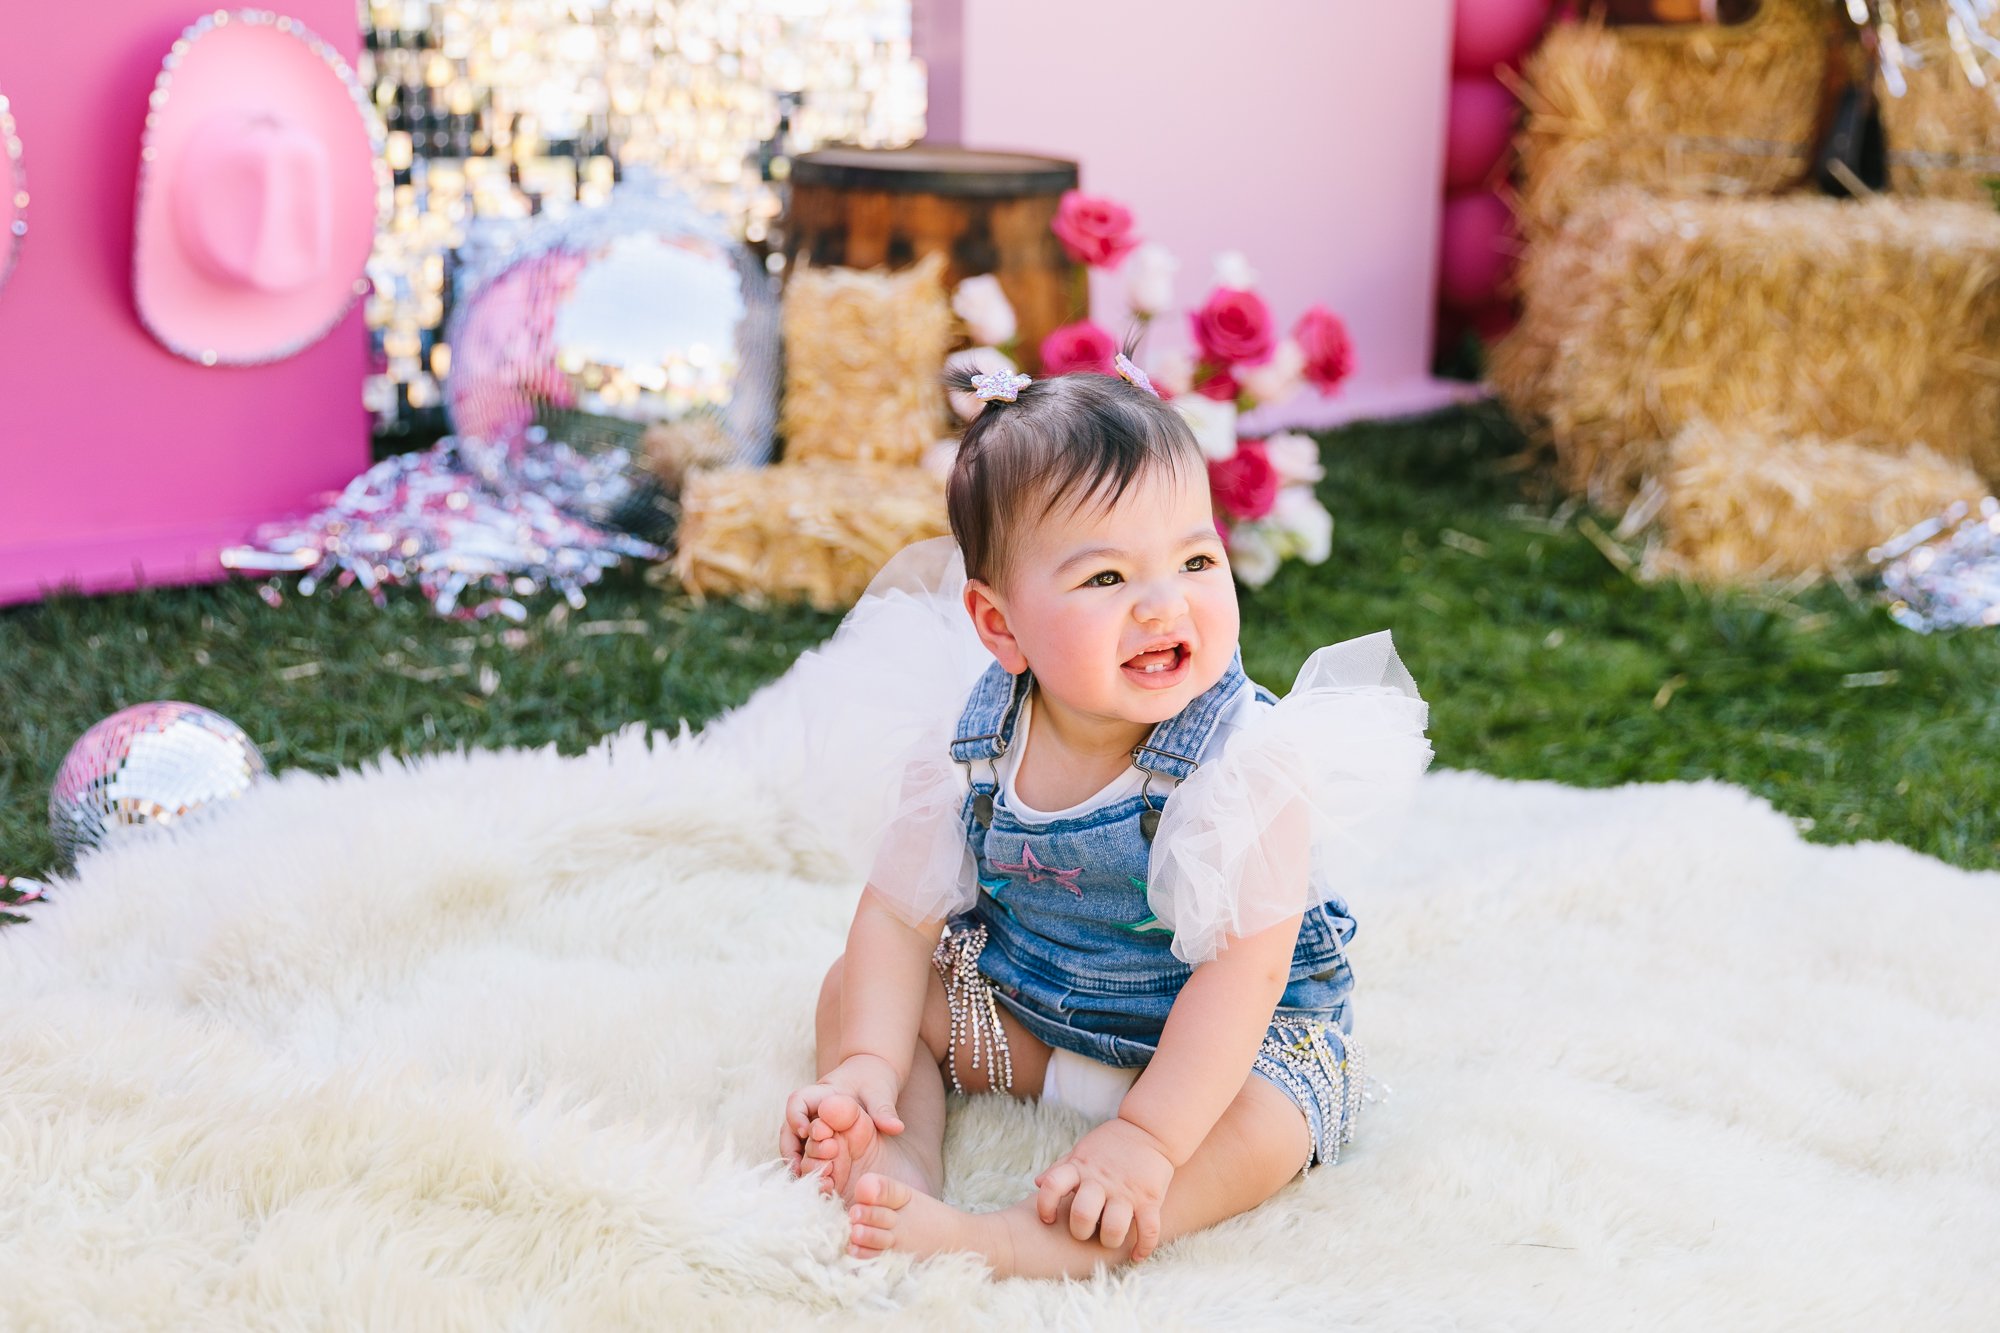 Los_Angeles_Party_Photographer_Luxury_Event_First_Birthday_Baby_Sherwood_Beverly_Hills_Cowboy_Disco_Theme_Girl_Child_Family_Photography-0305.jpg